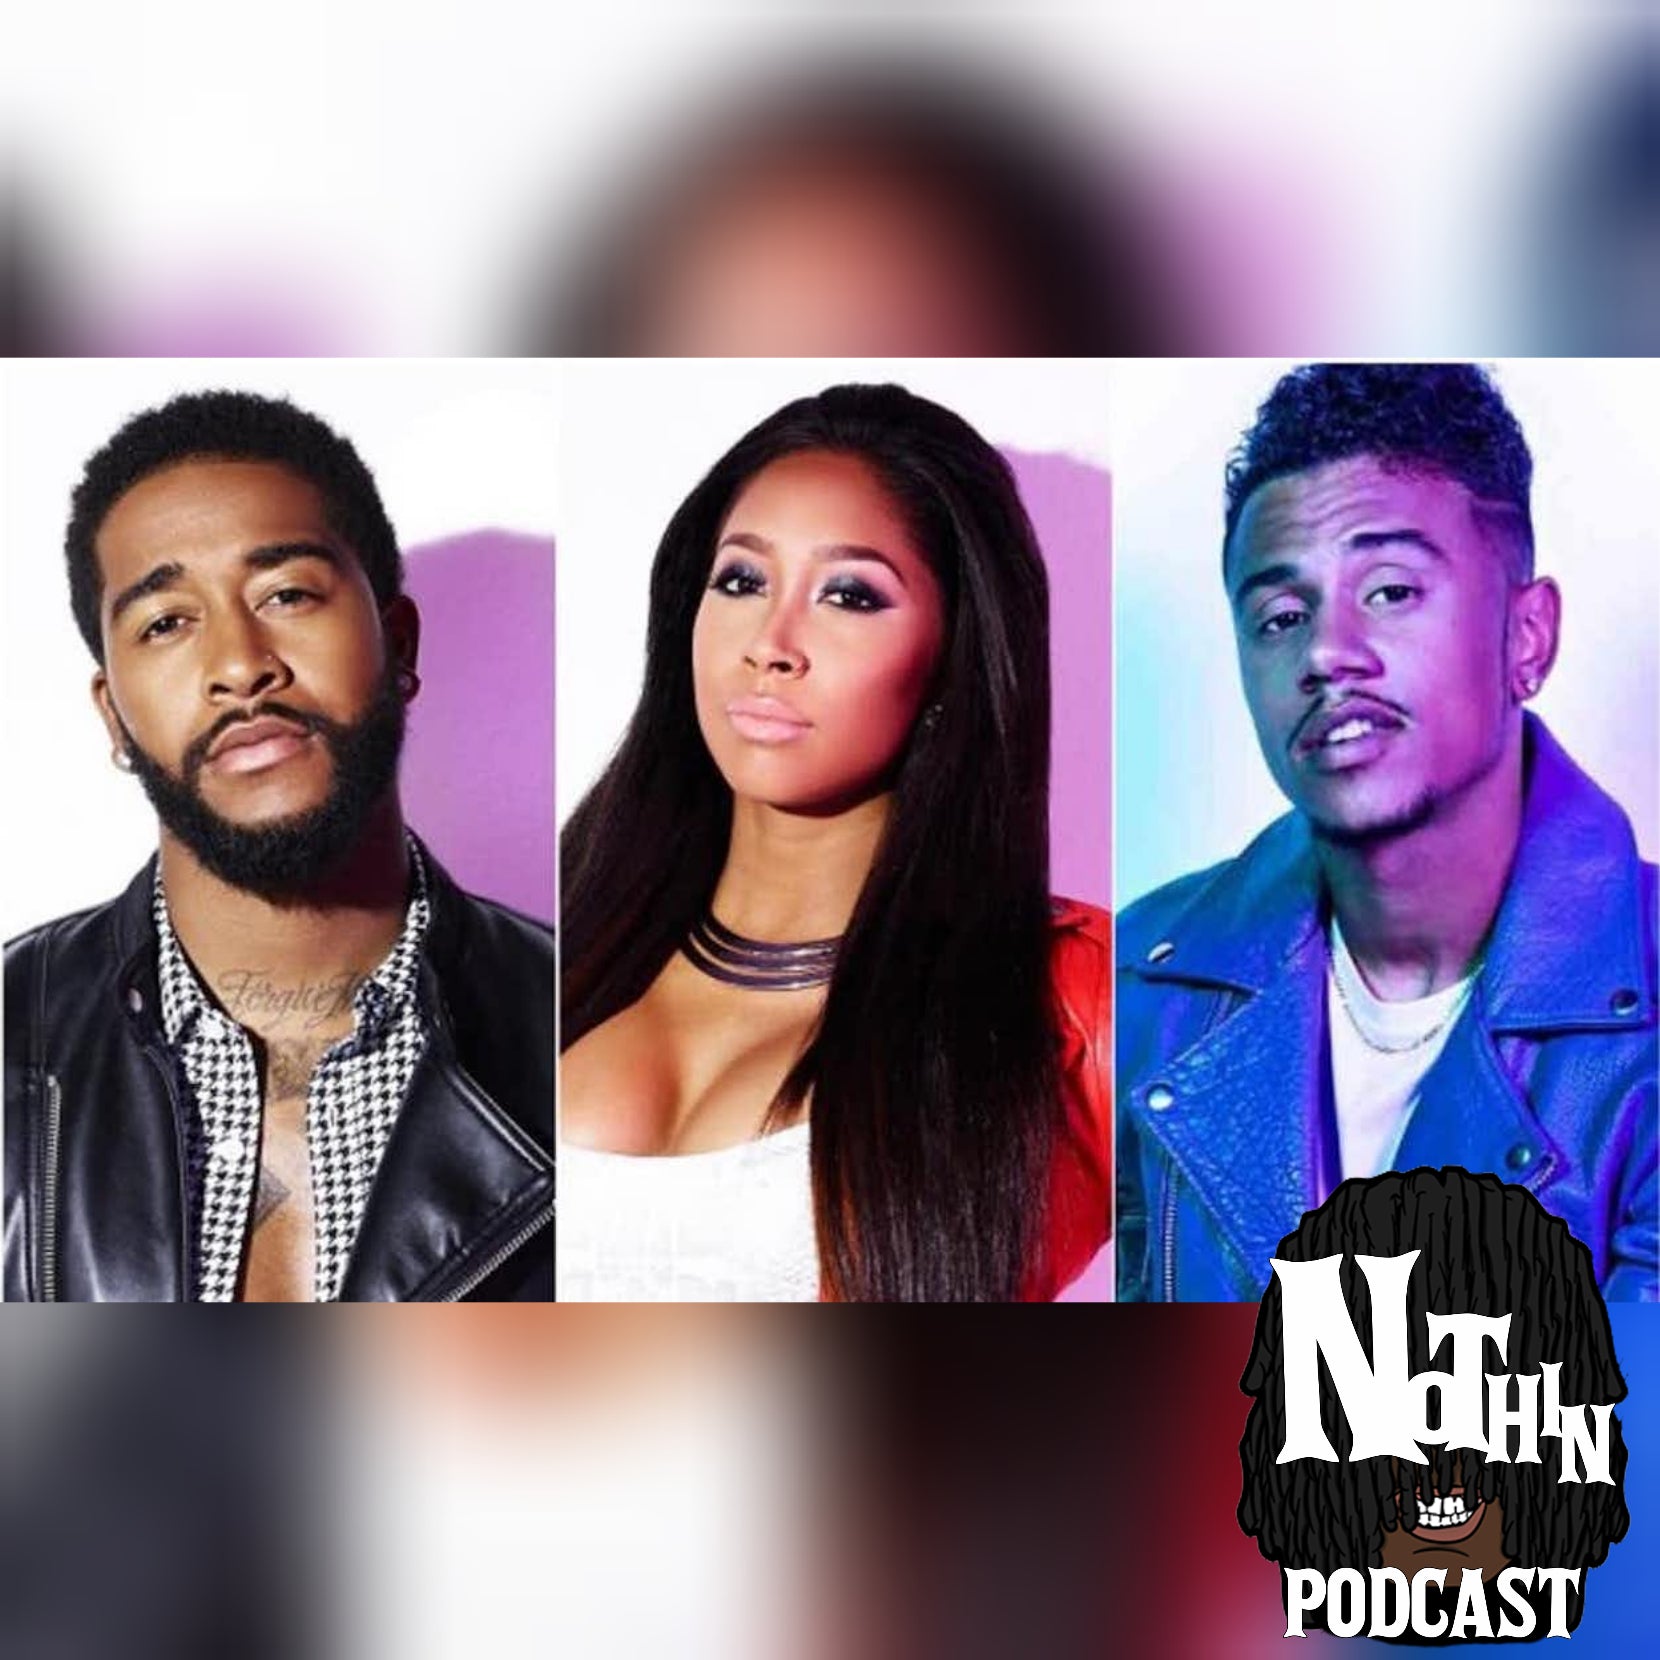 Omarion ready to exspose Apryl Jones And The Entire B2k in Up Coming Docu series